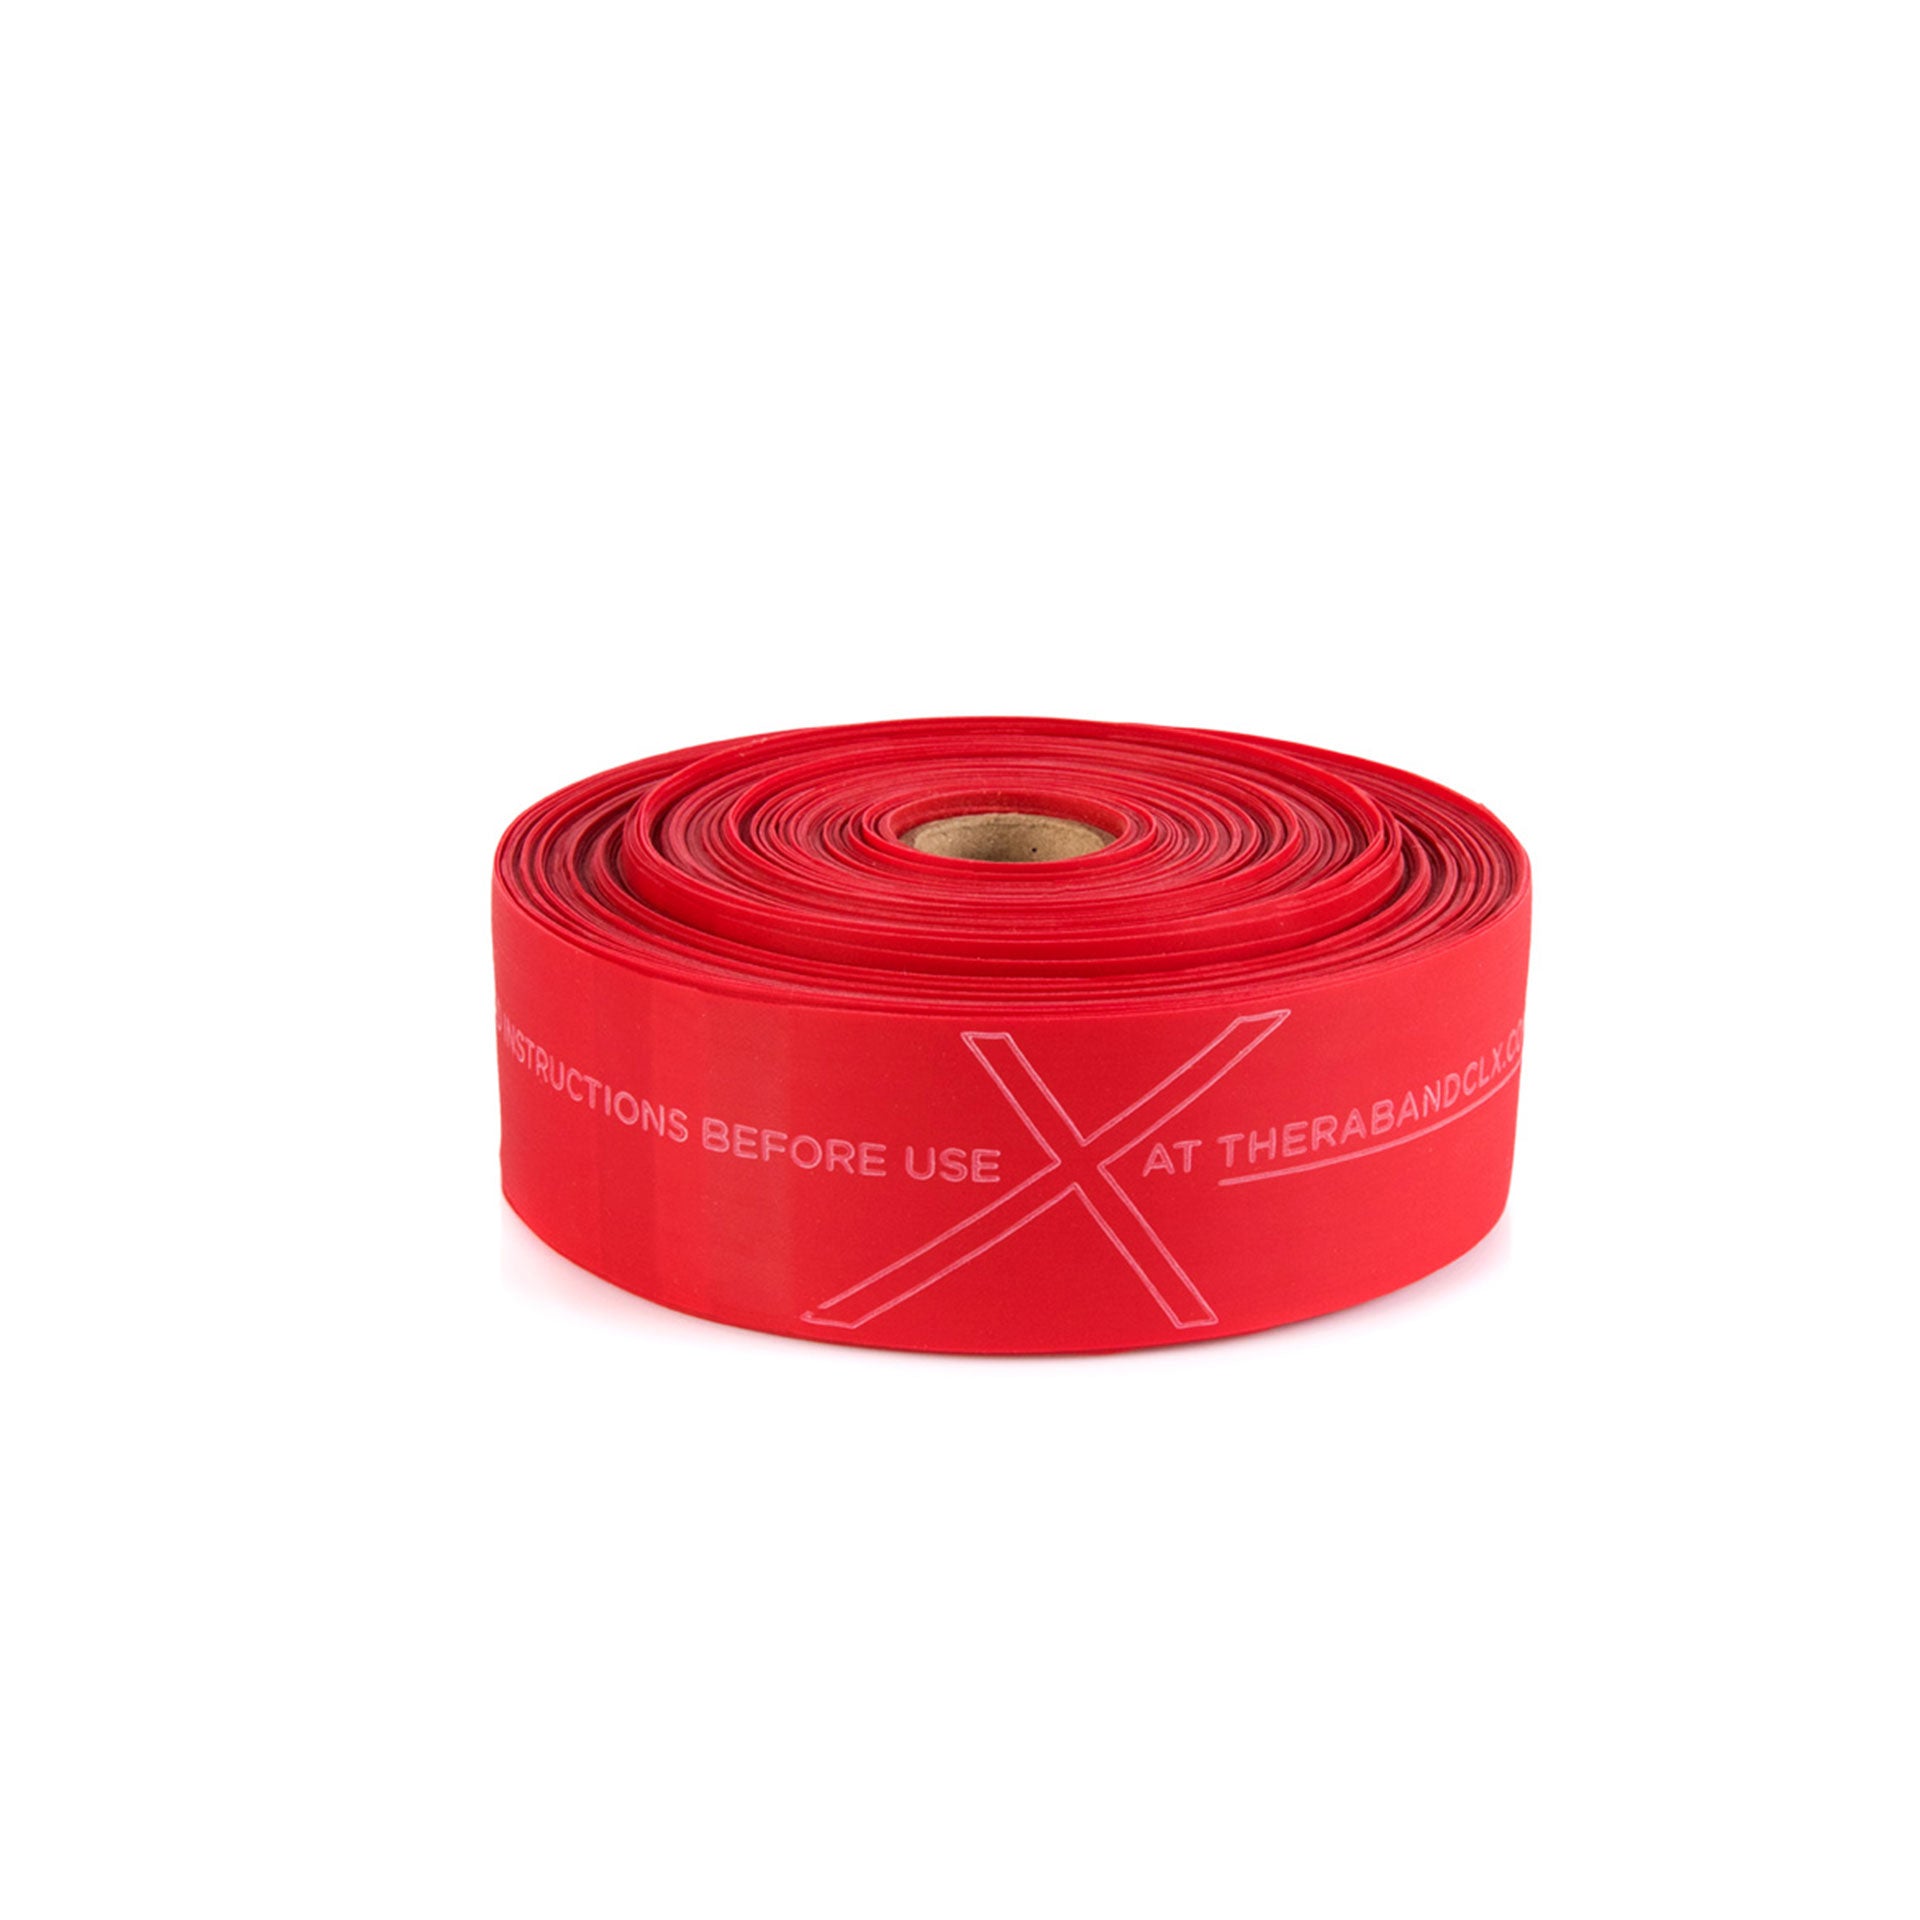 CLX Rolle 22 m Fitnessband TheraBand Rot  